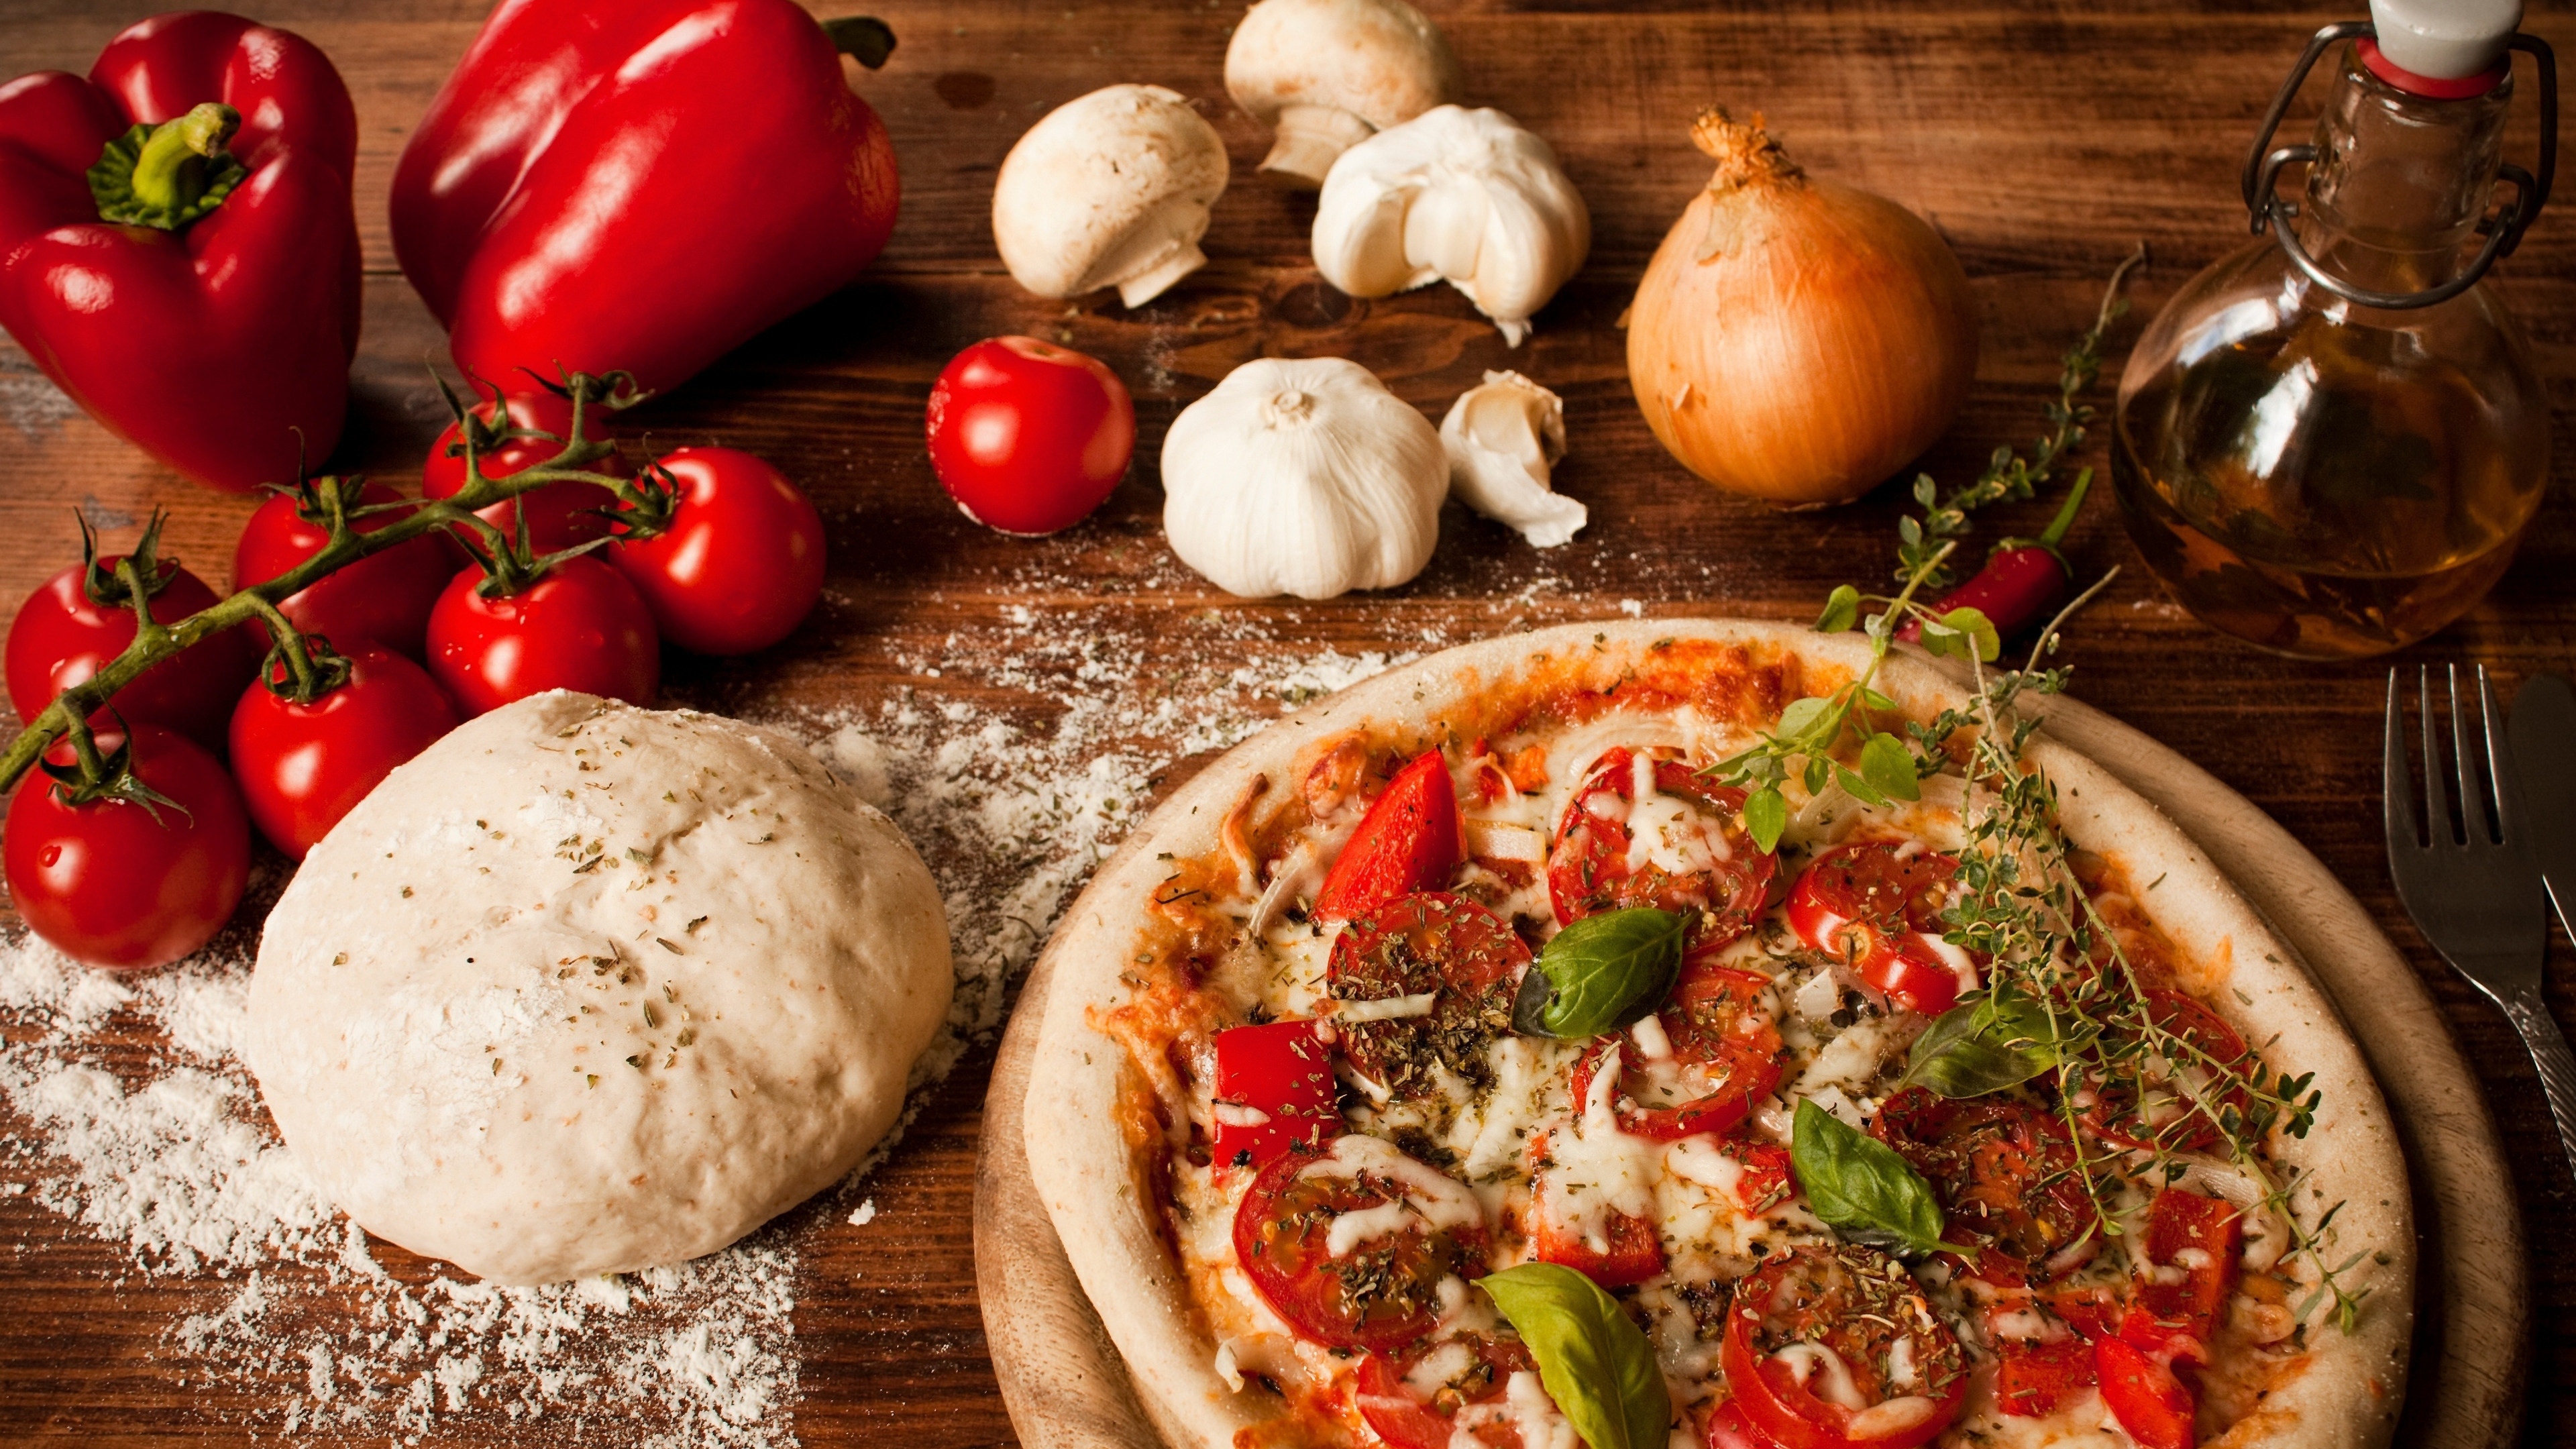 General 3840x2160 pizza food vegetables onion flour tomatoes wooden surface closeup bell peppers